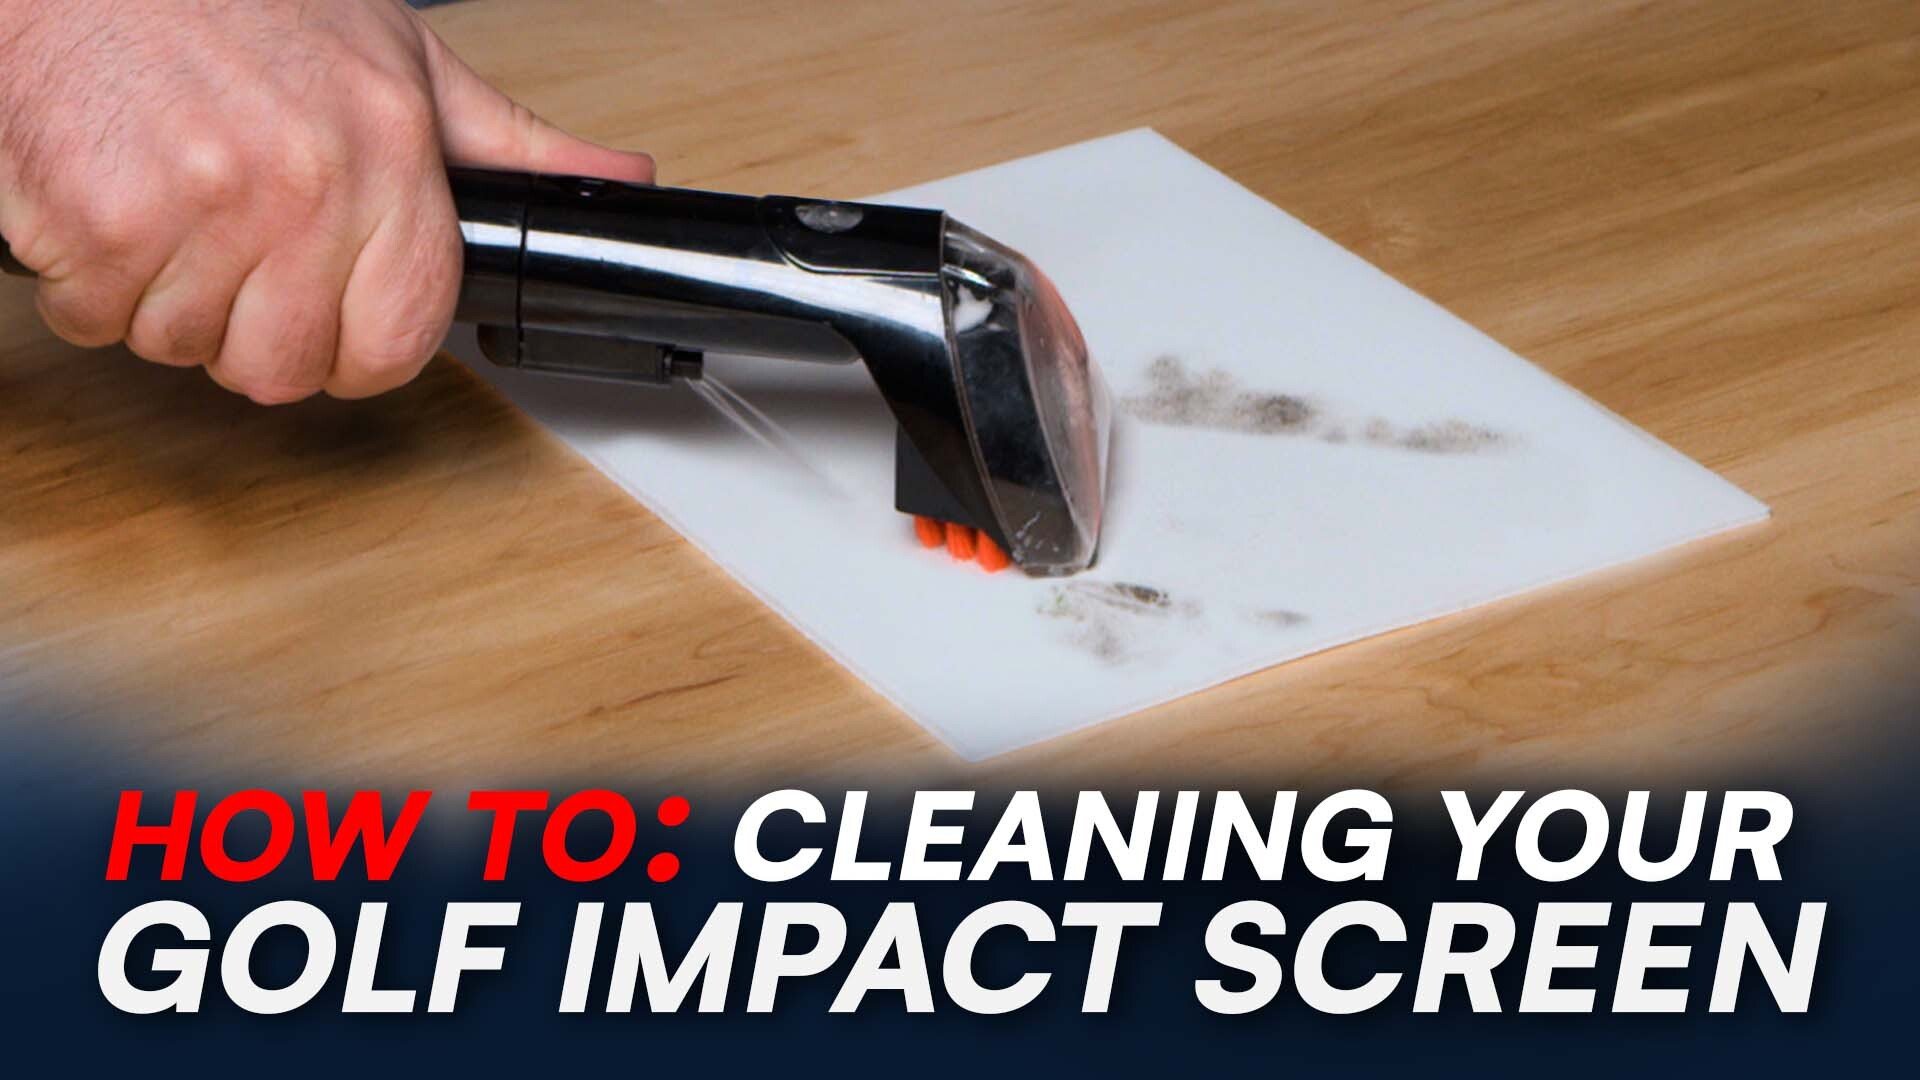 Cleaning a golf impact screen